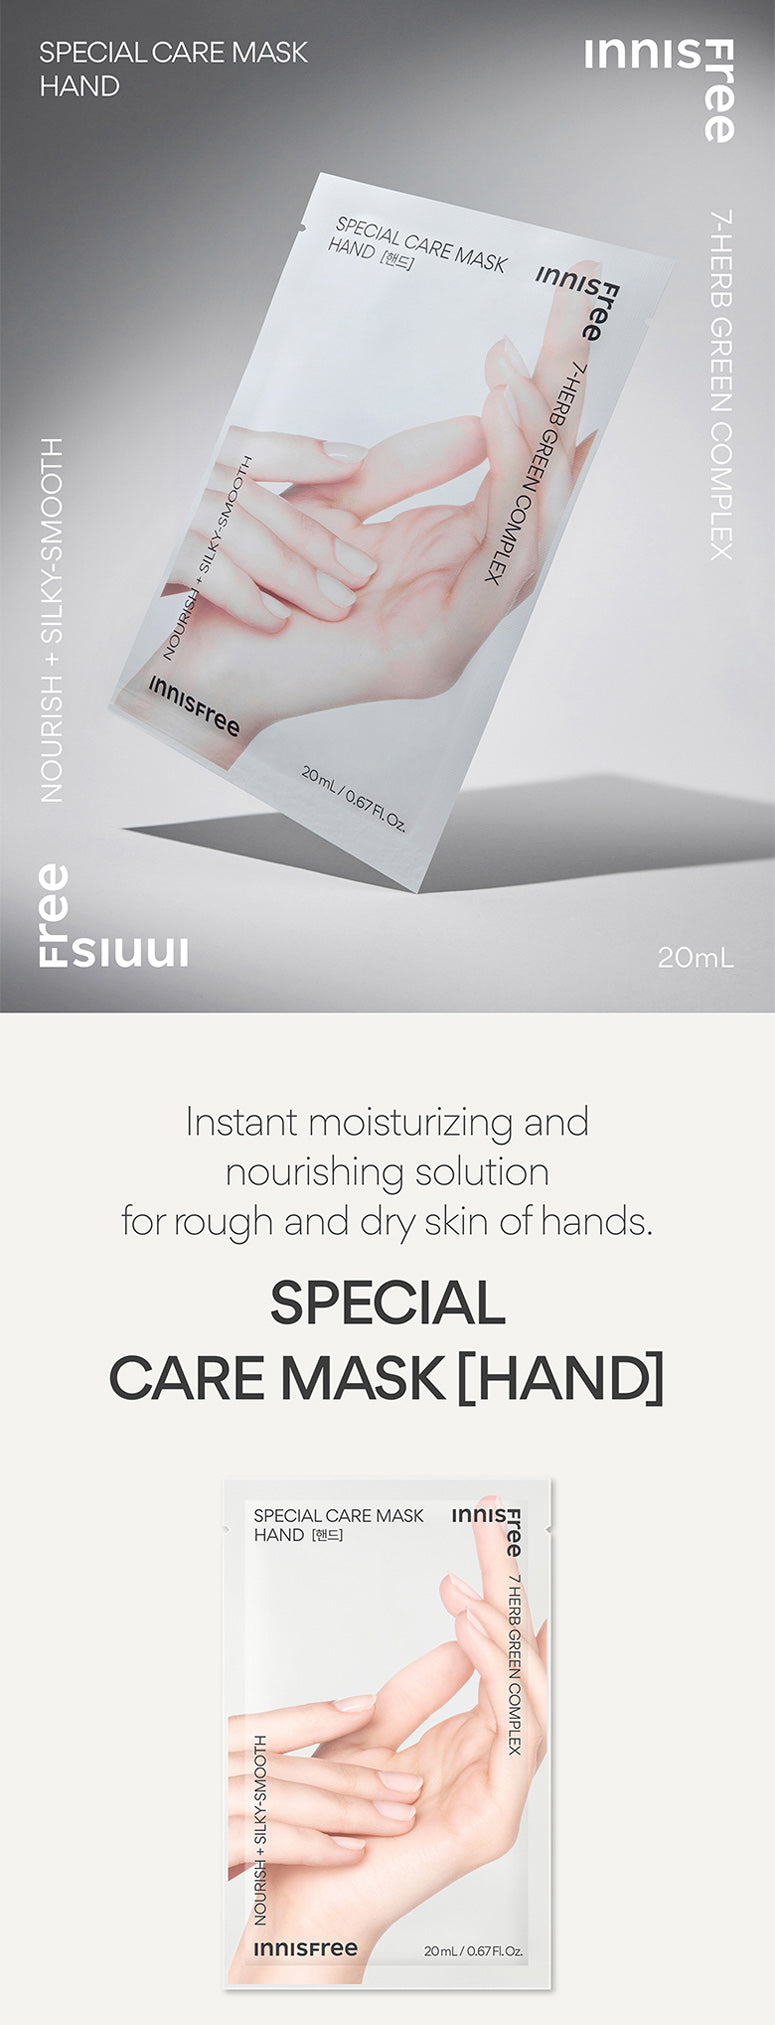 SPECIAL CARE MASK HAND page one.